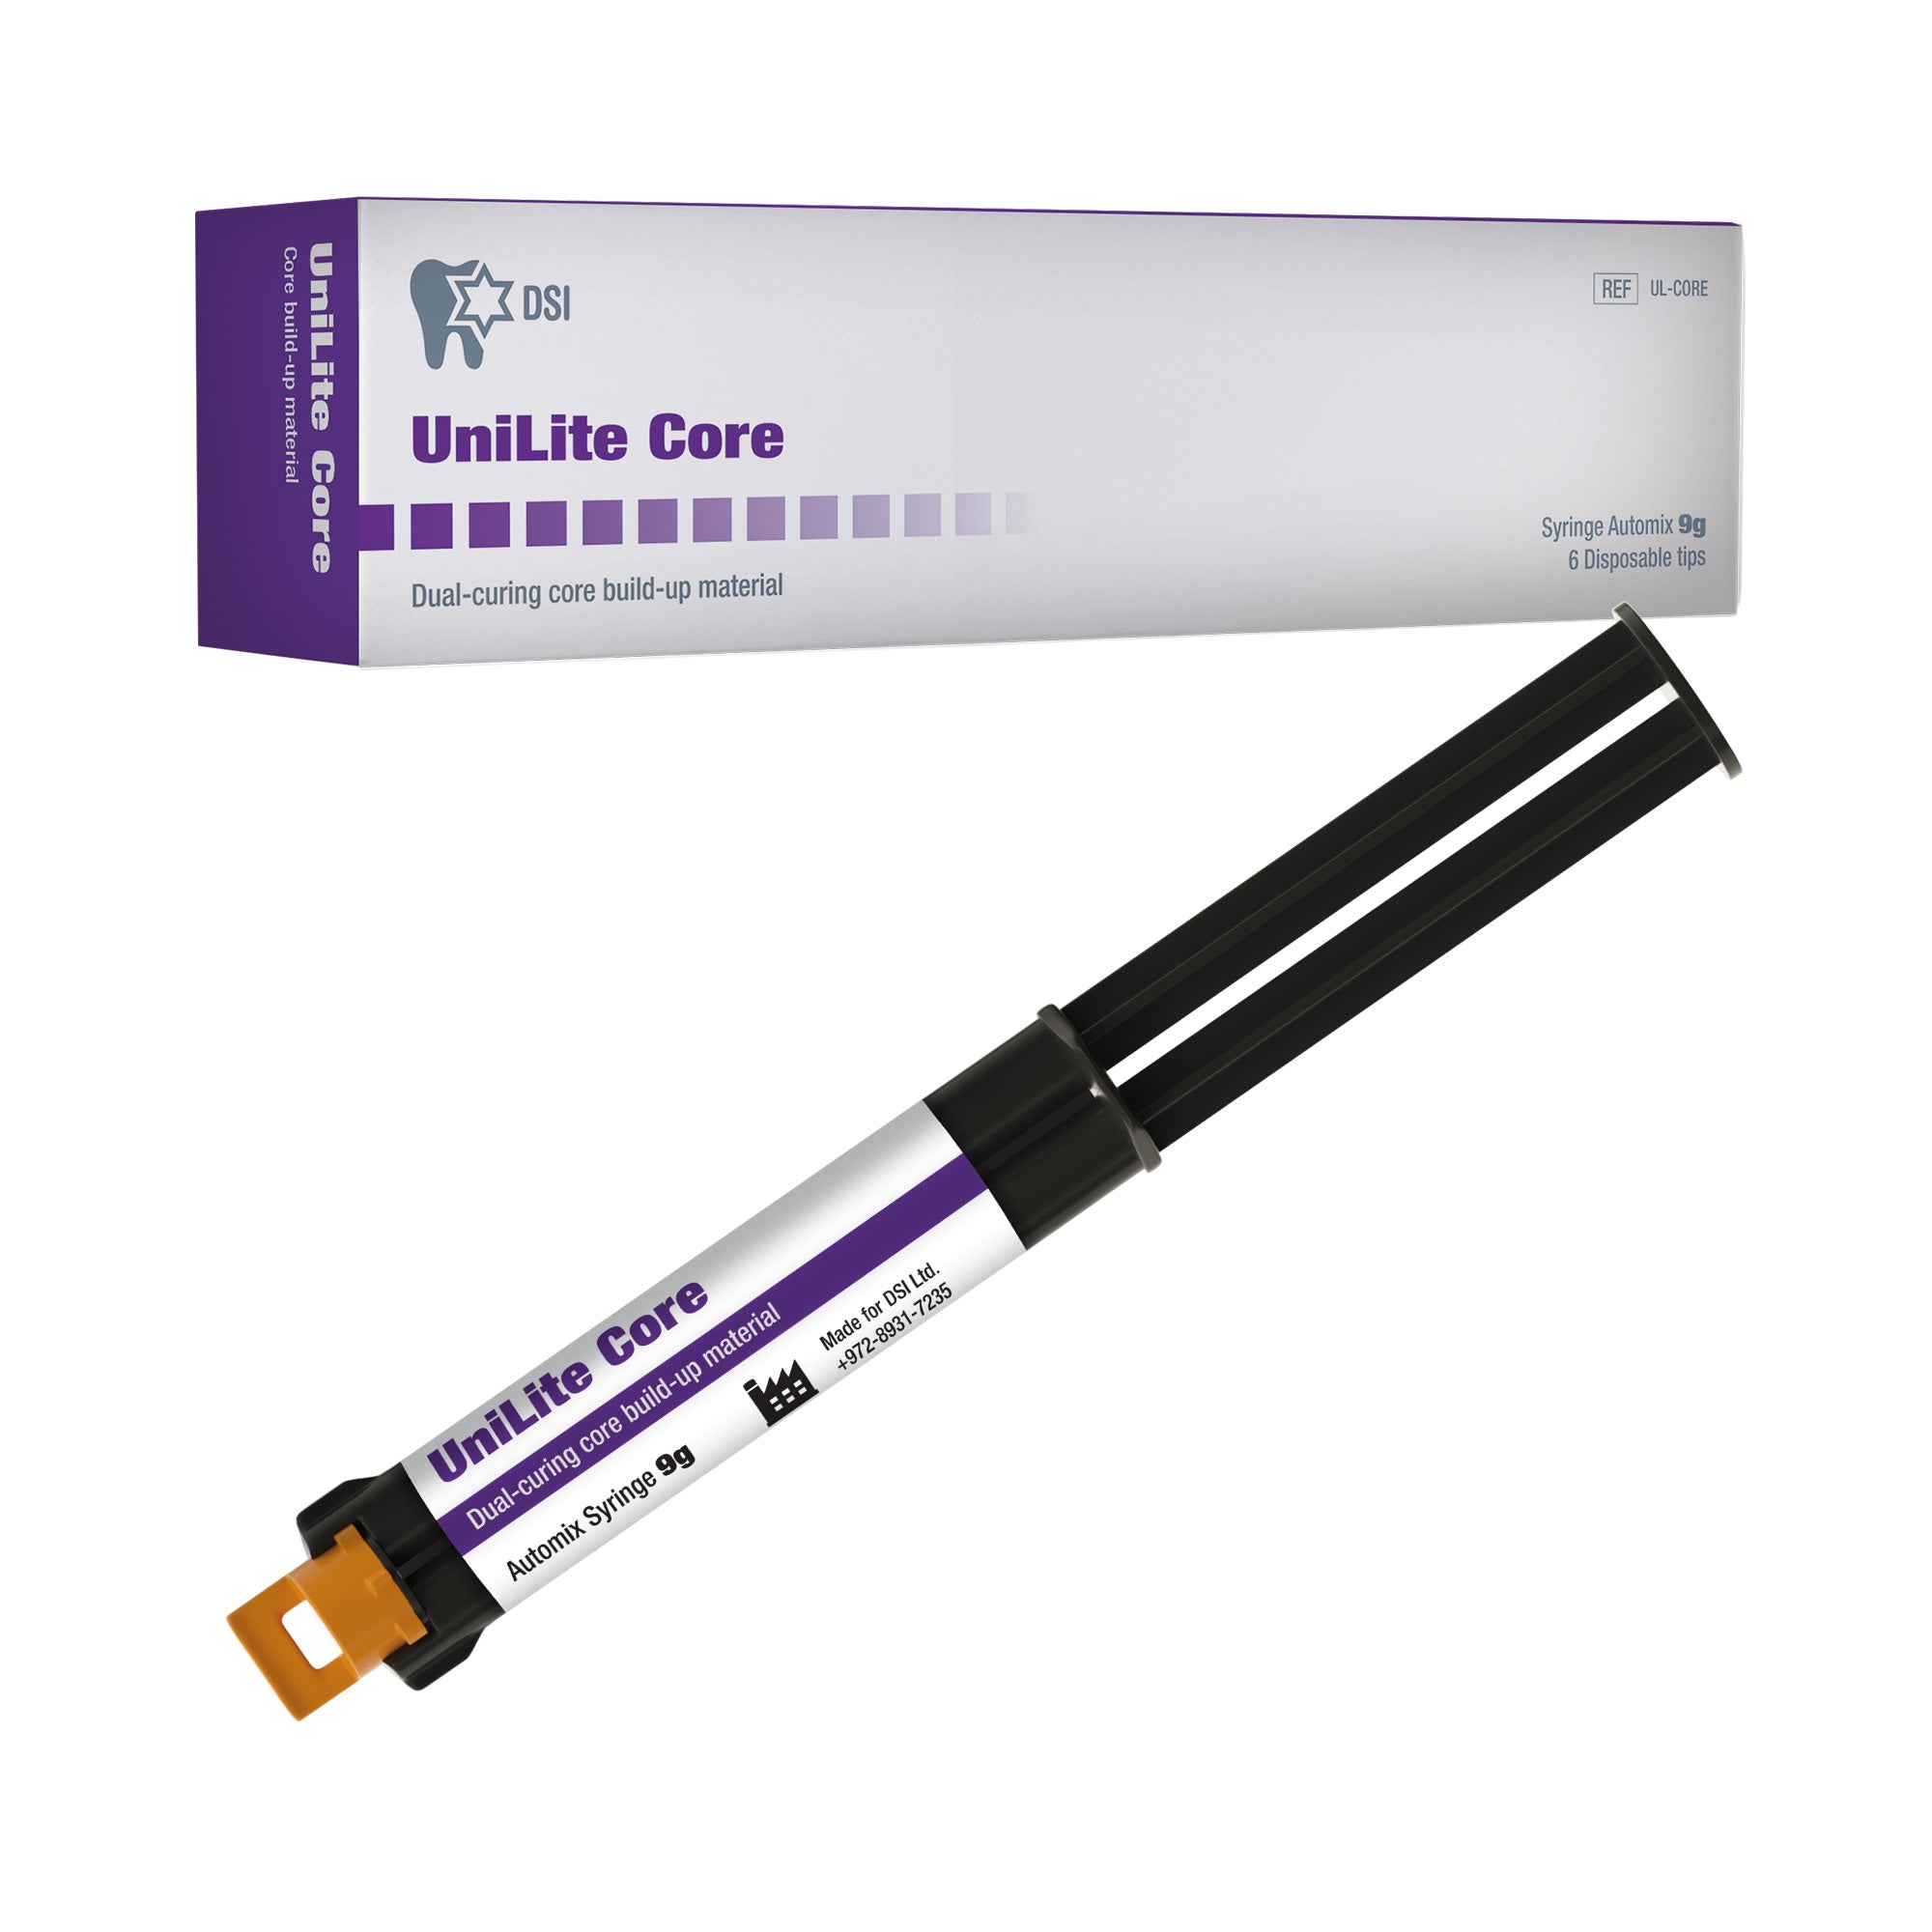 DSI UniLite Core Dual-Curing Core Build Up Material Automix Syringe 9g